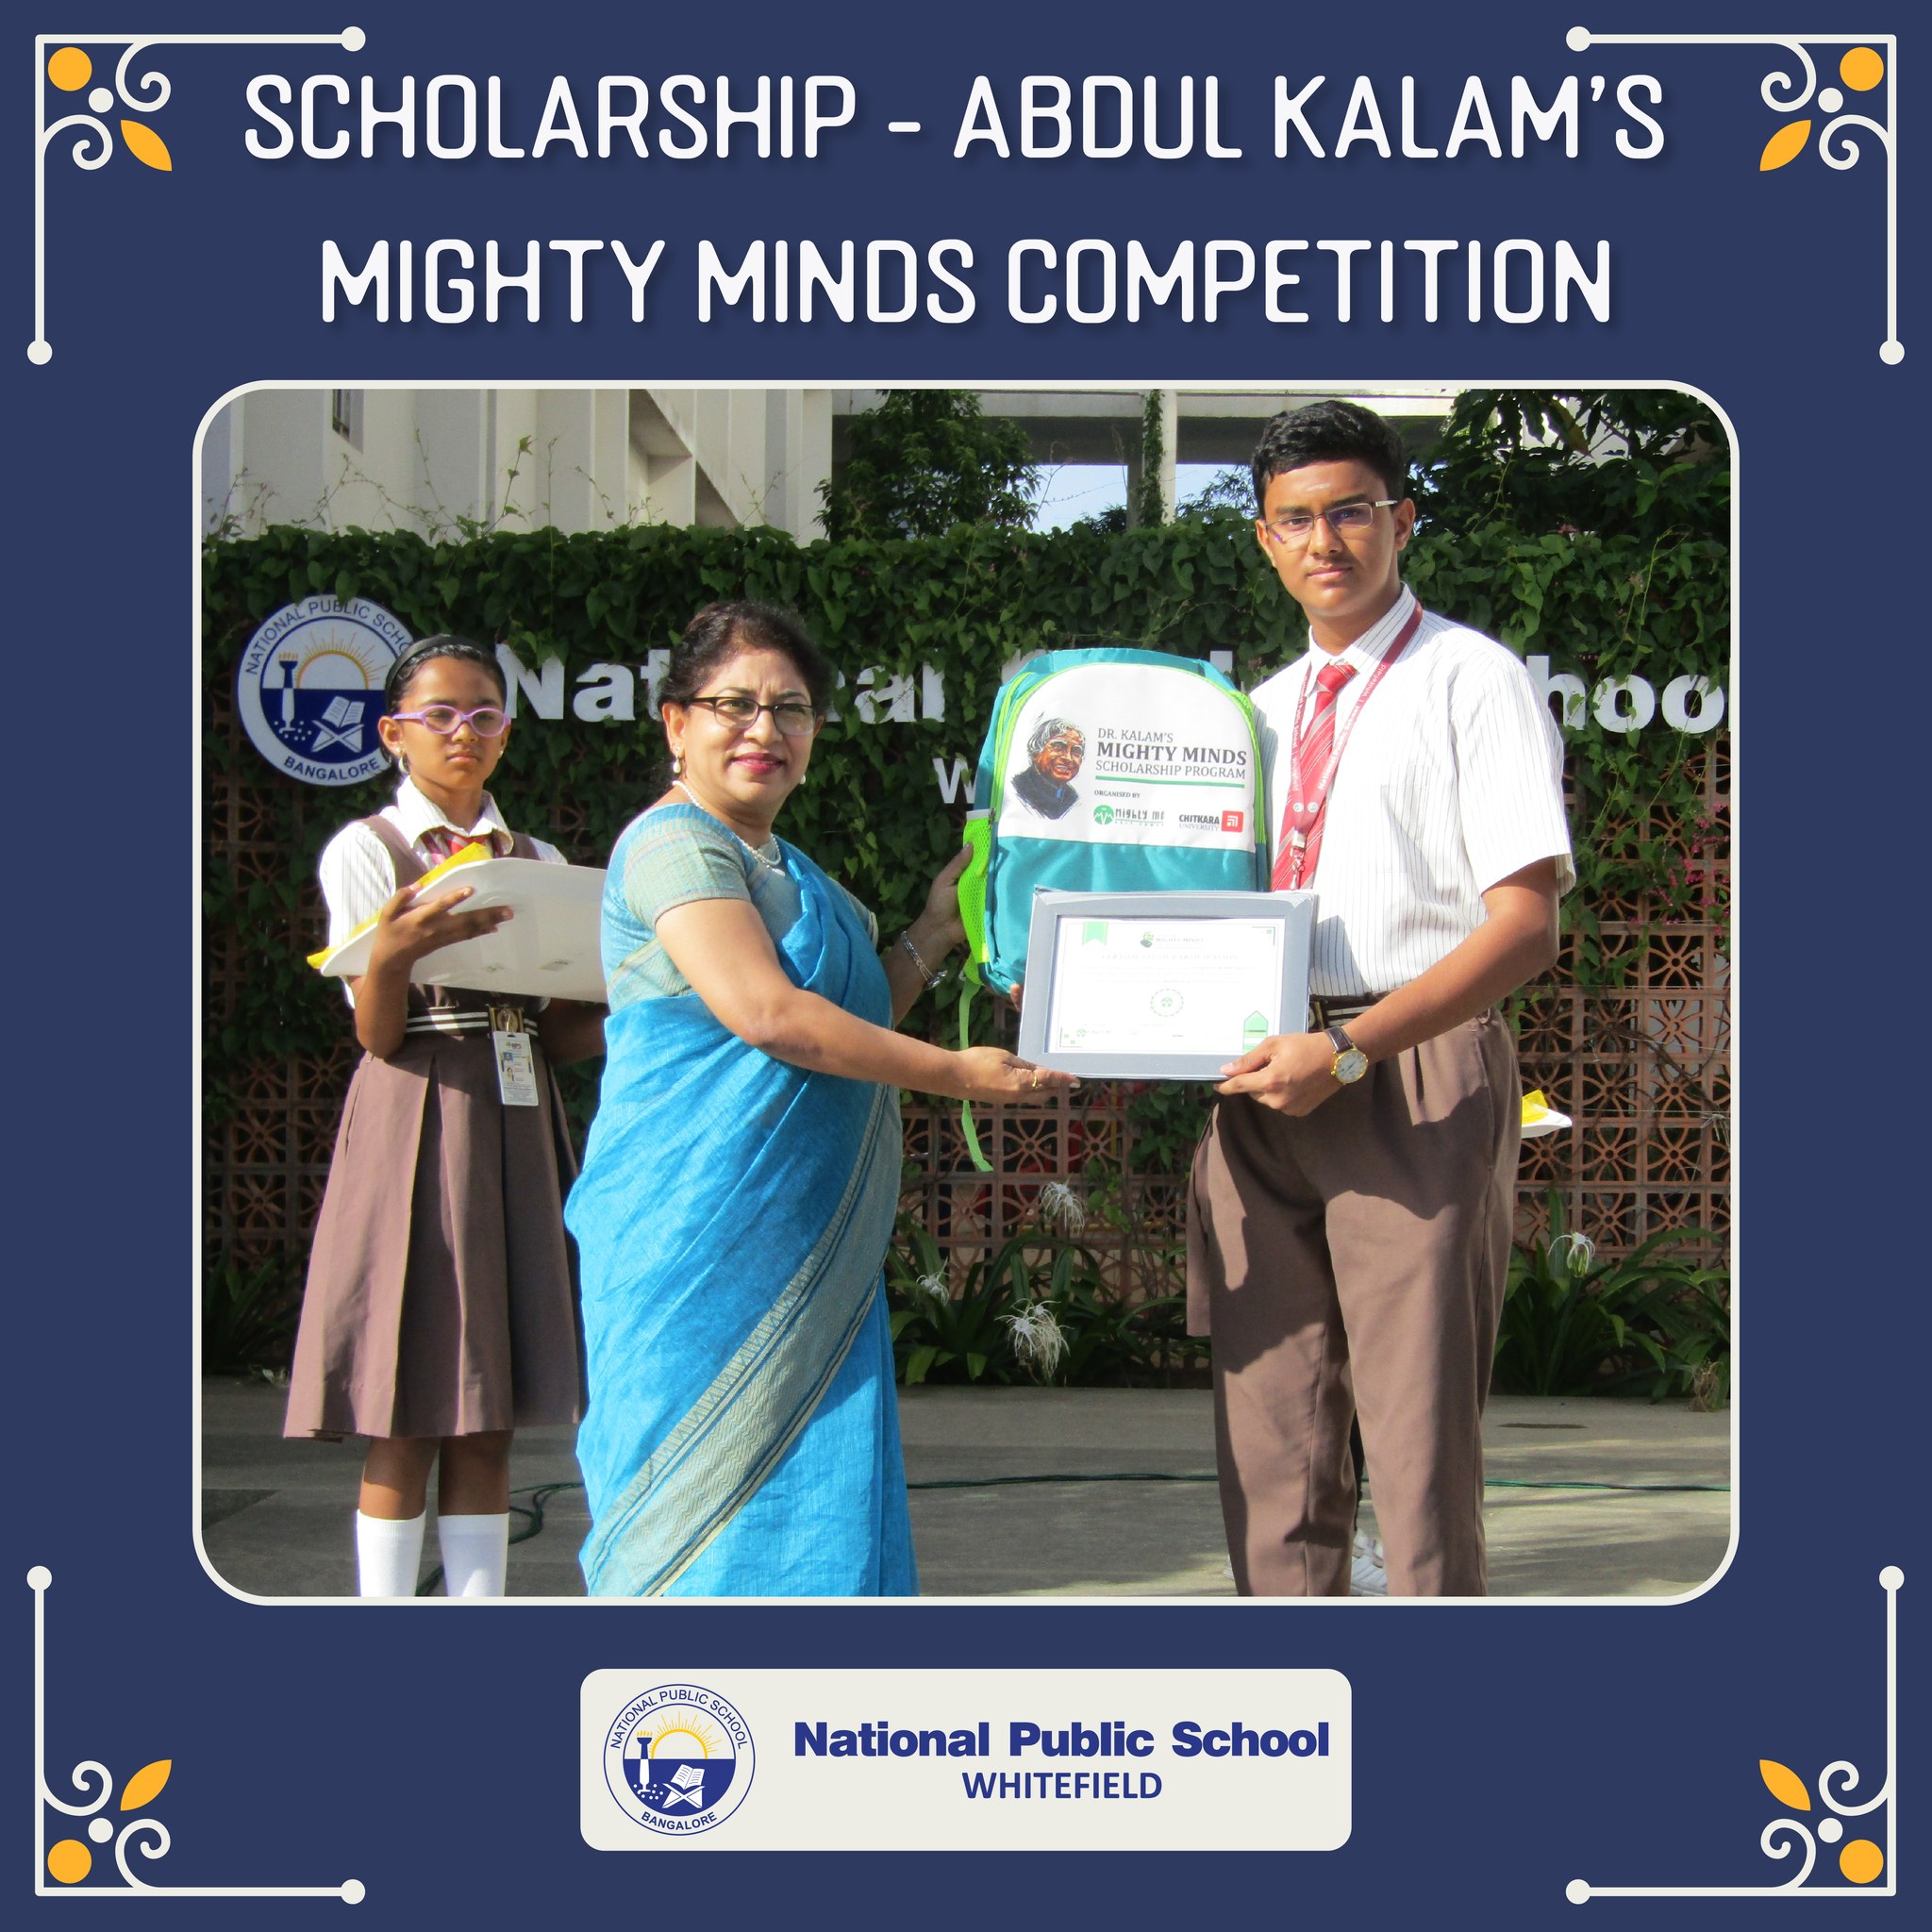 Abdul Kalam's Mighty Minds Competition